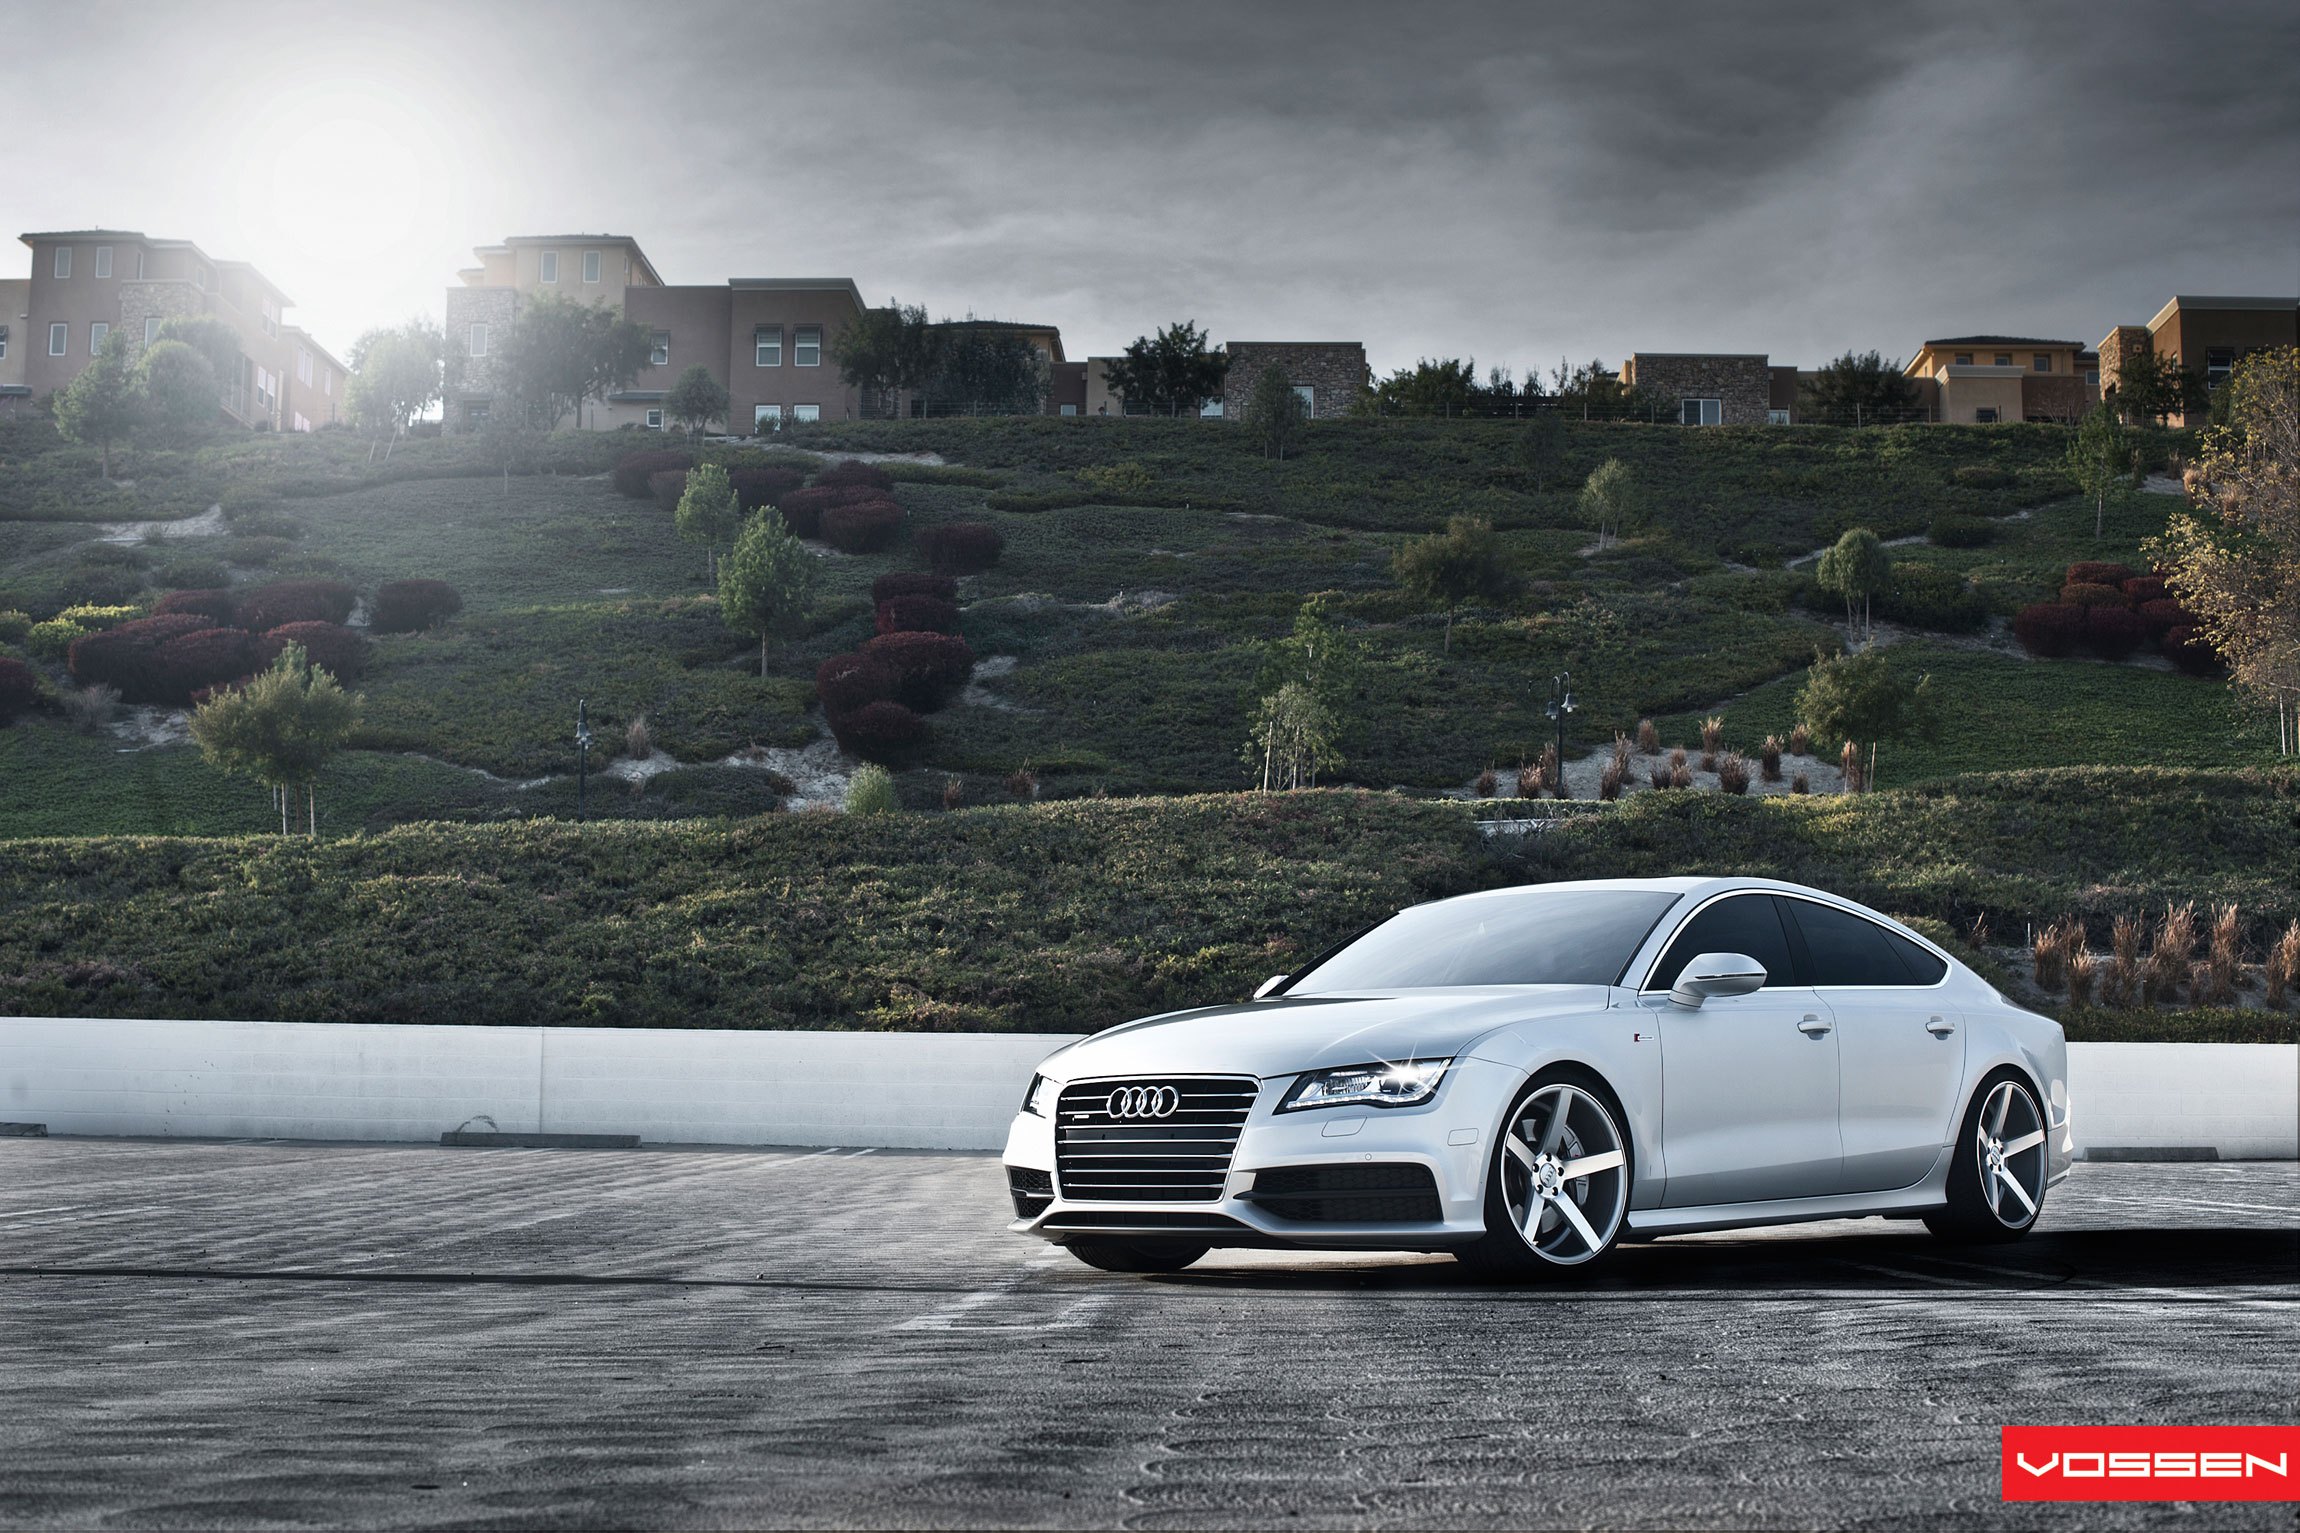 Silver Audi A7 with Custom Front Bumper - Photo by Vossen